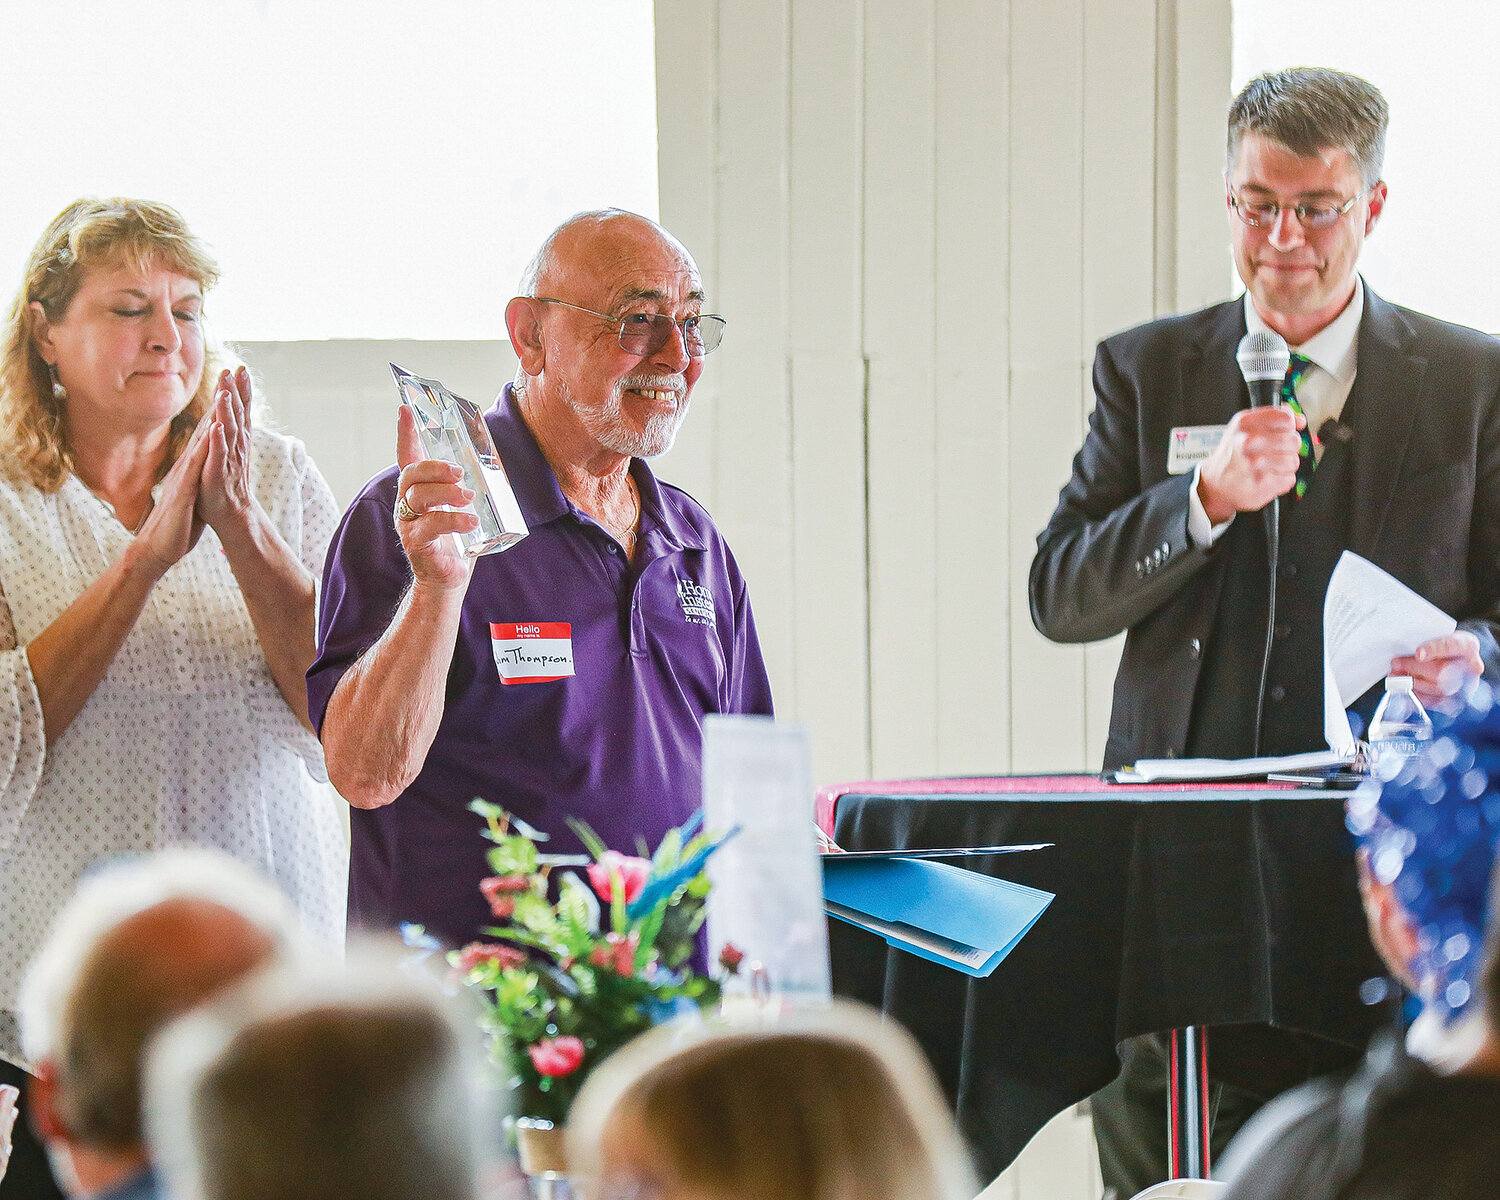 Jim Thompson of Home Instead was awarded a Caregiver of the Year award during the seventh annual Senior Heroes Awards ceremony at the Pearson Air Museum in Vancouver on Wednesday, July 12.